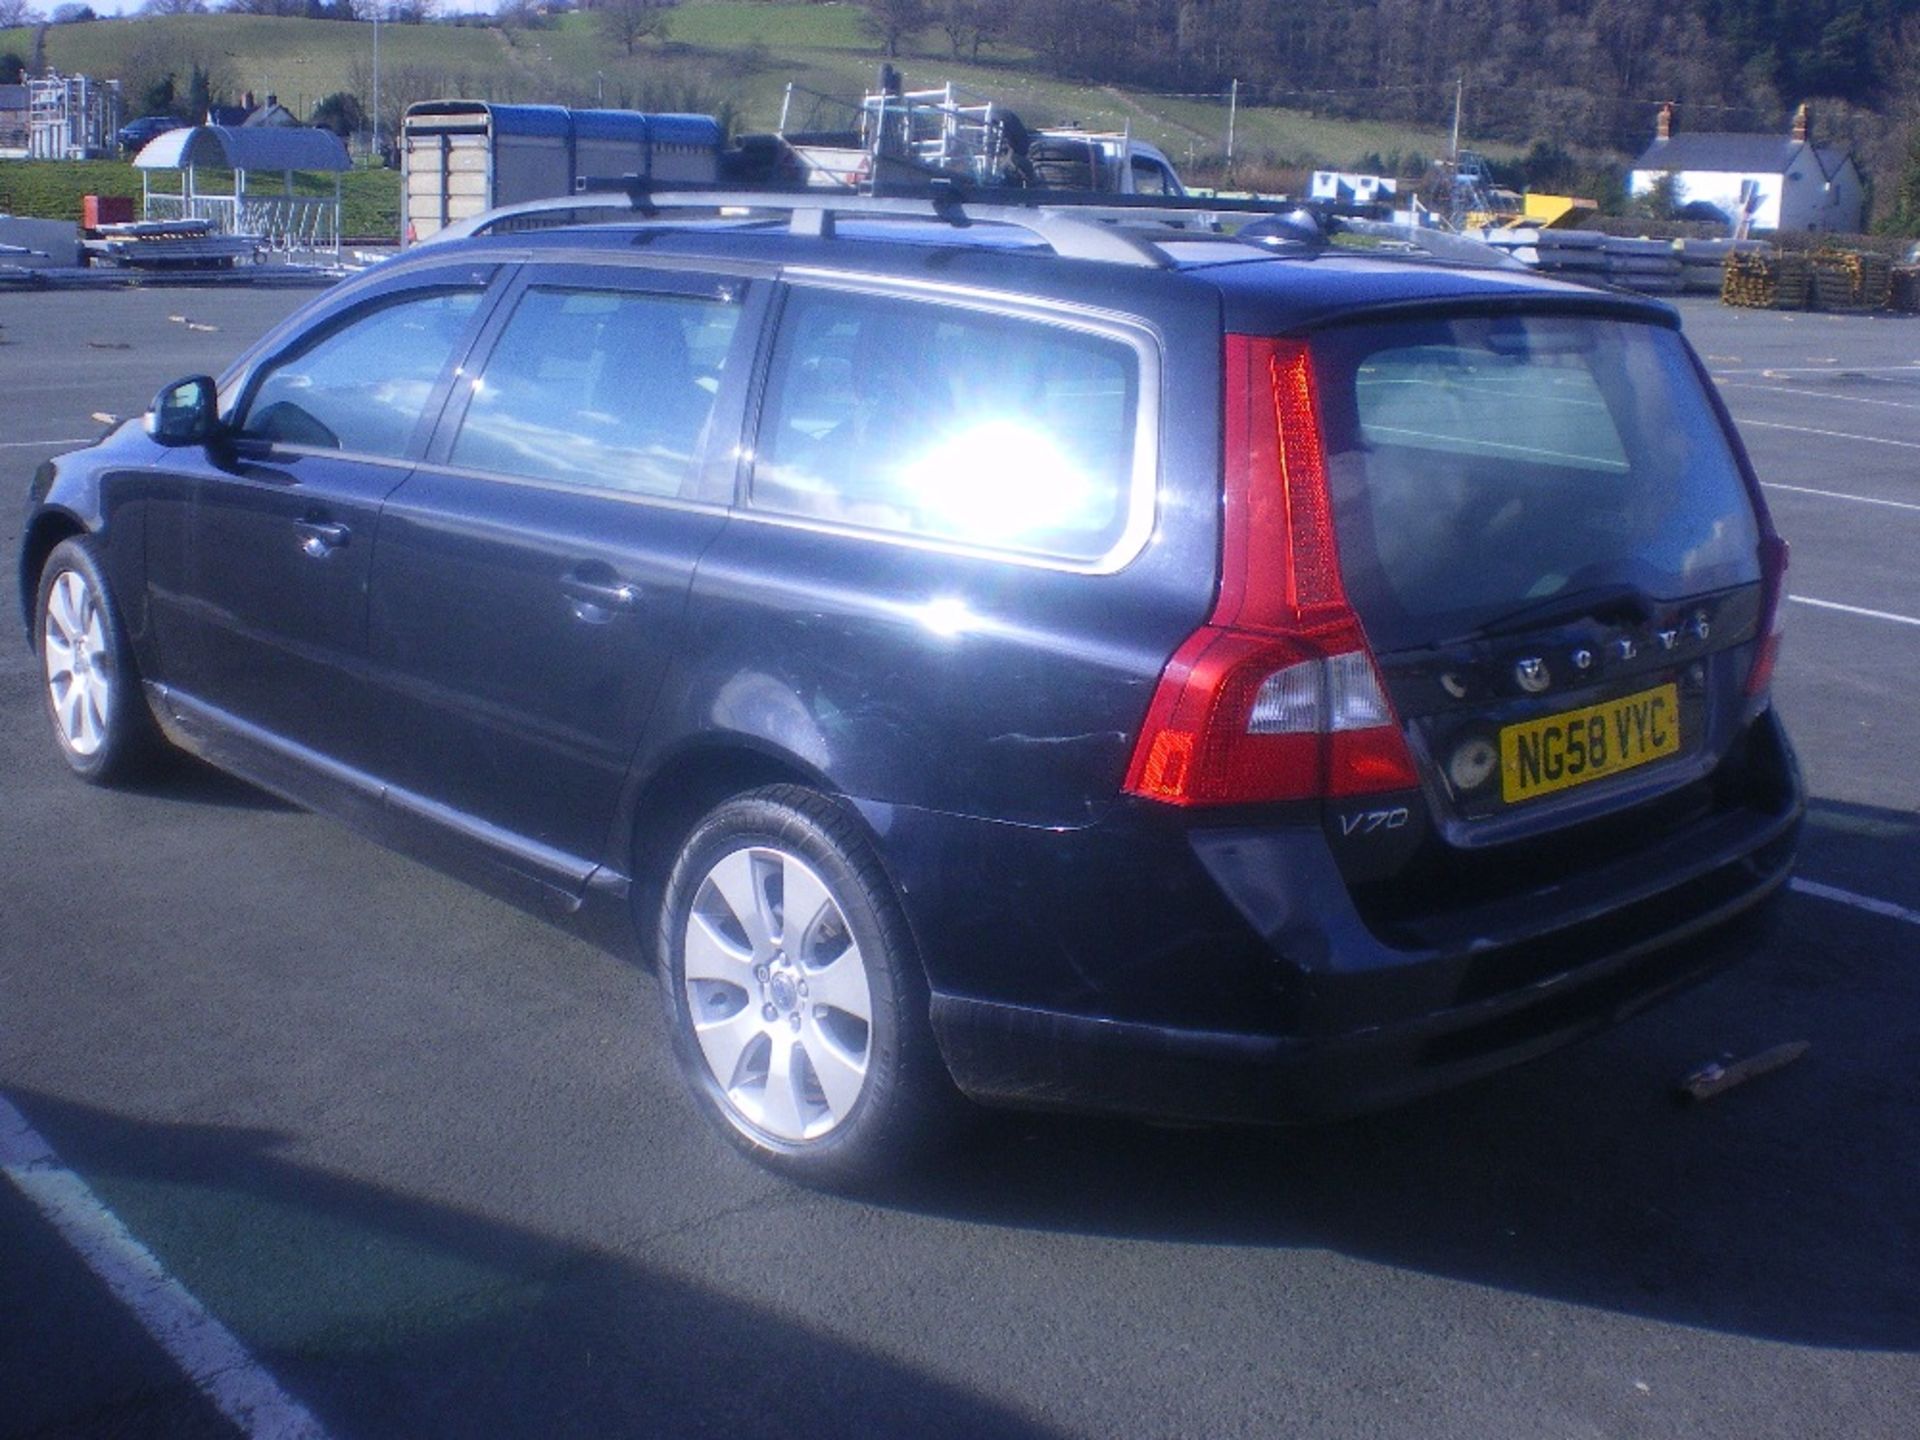 VOLVO CAR - NG58 VYC 103,209 MILES (APPROX) - Image 3 of 4